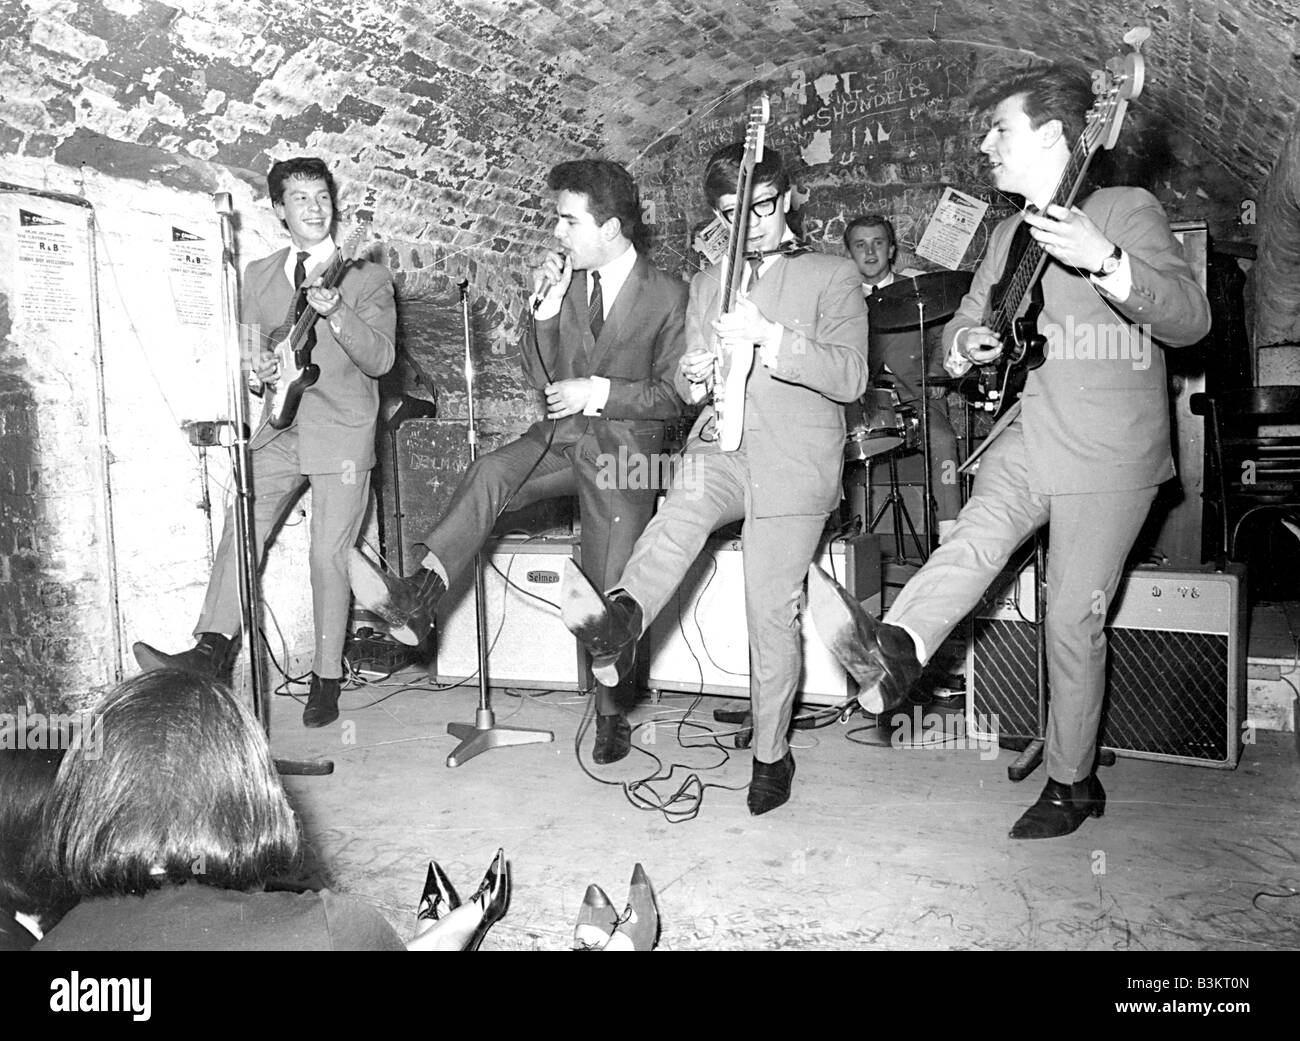 THE CAVERN CLUB in Liverpool in 1964 with unknown group on stage Stock Photo